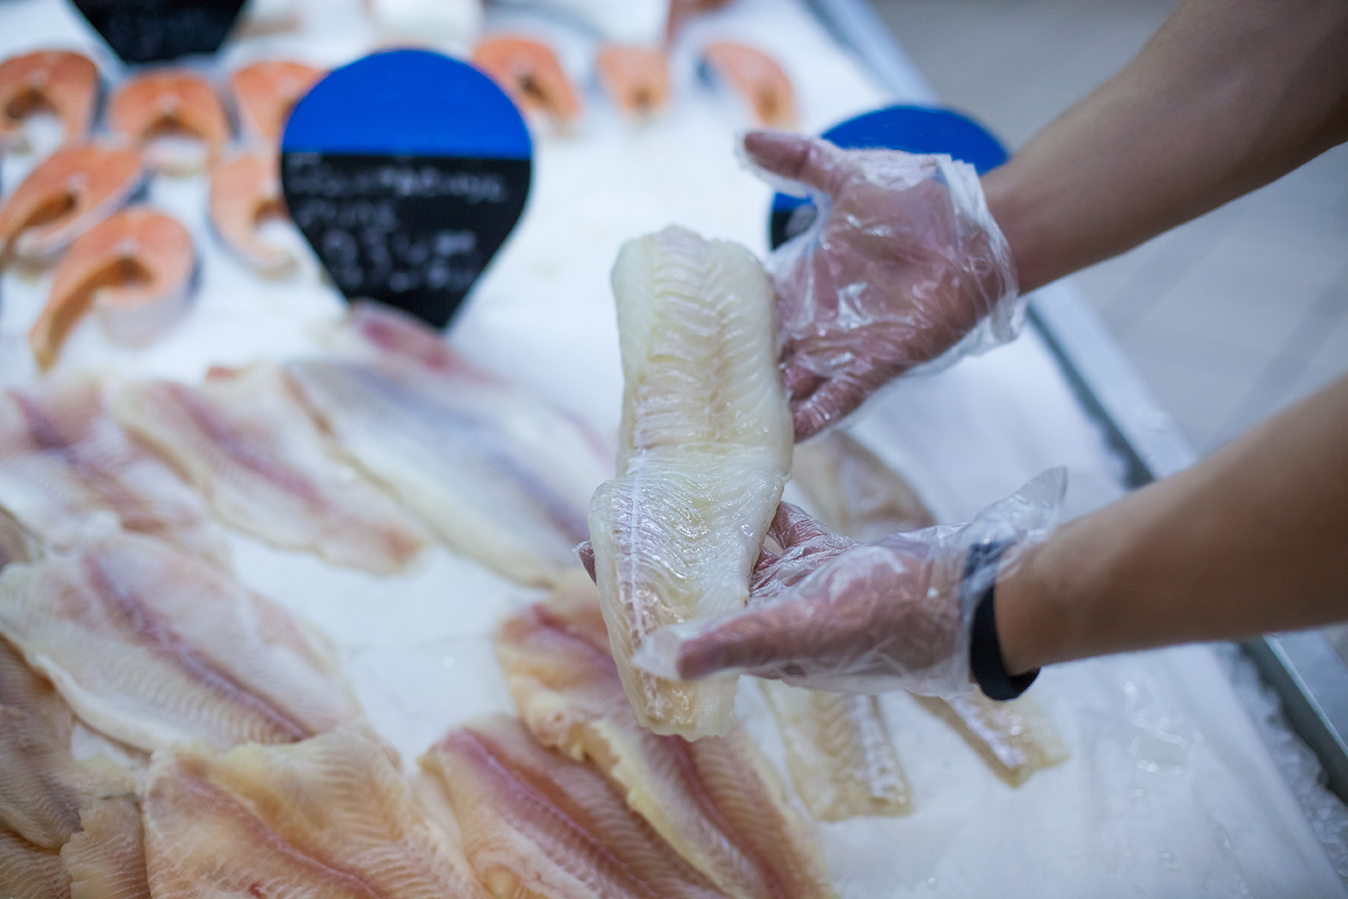 Gloved hands display a fish filet over ice at a market.